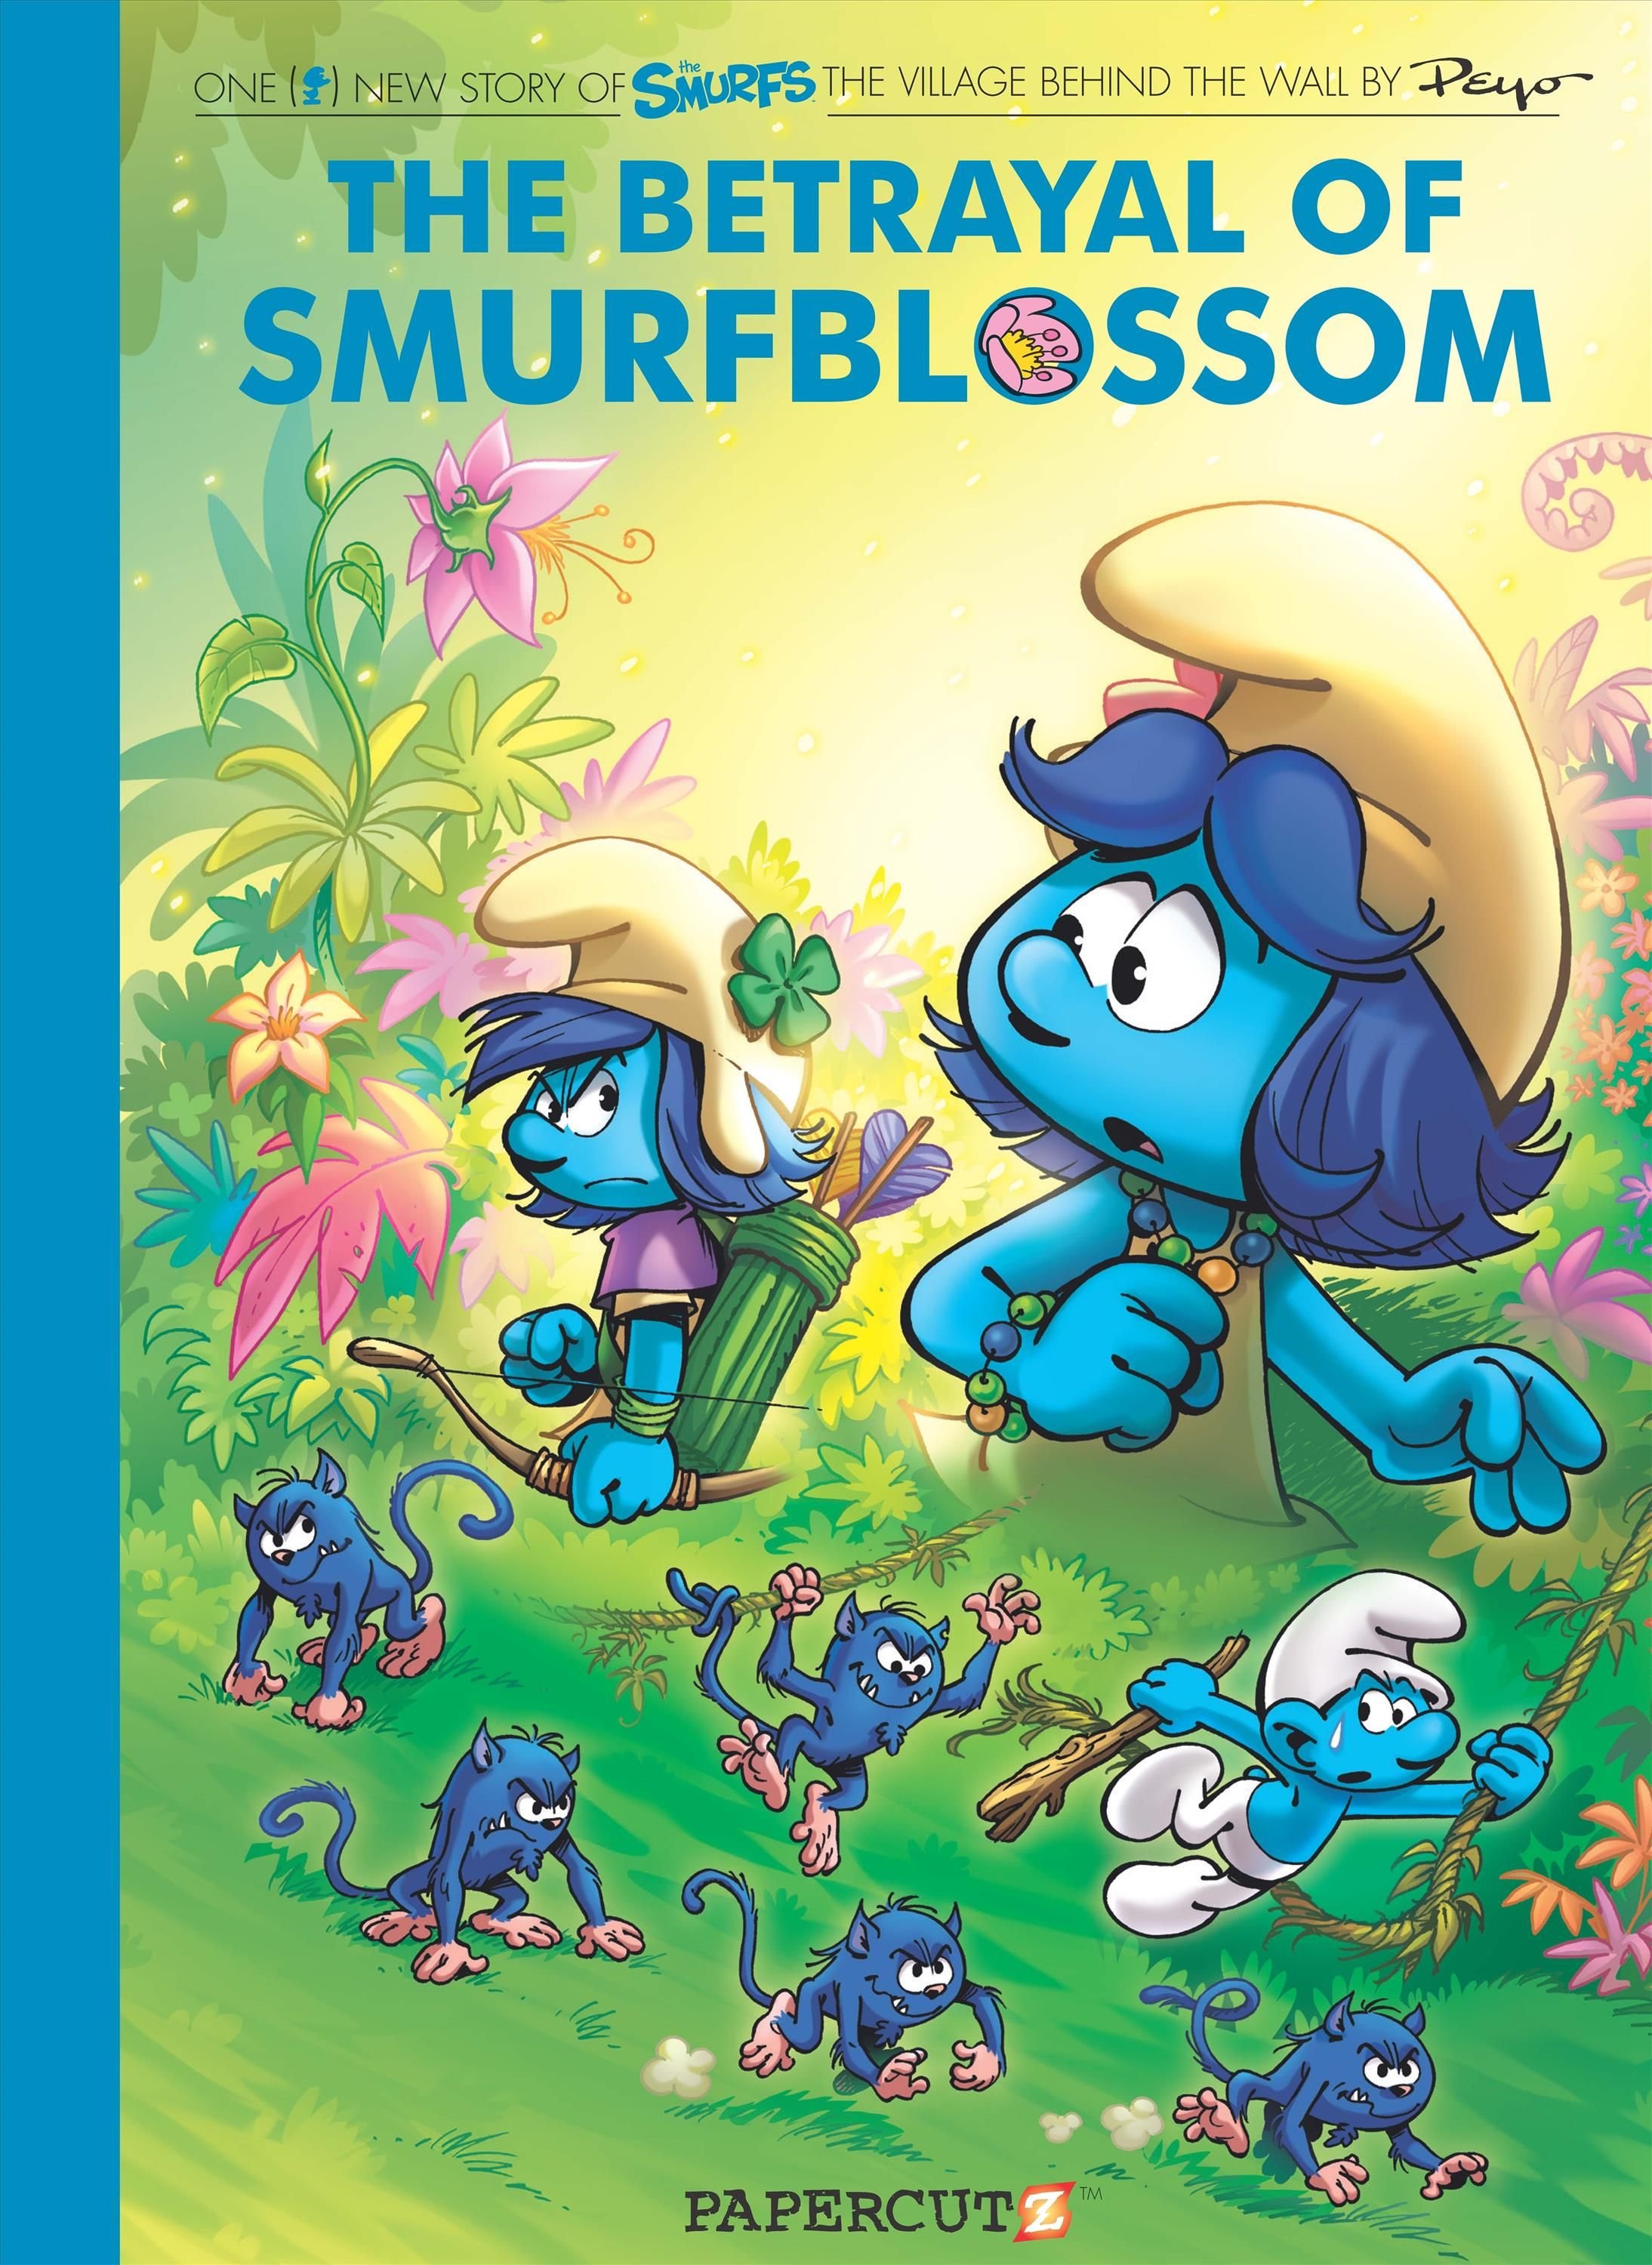 Smurf Tales Vol. 7, Book by Peyo, Official Publisher Page